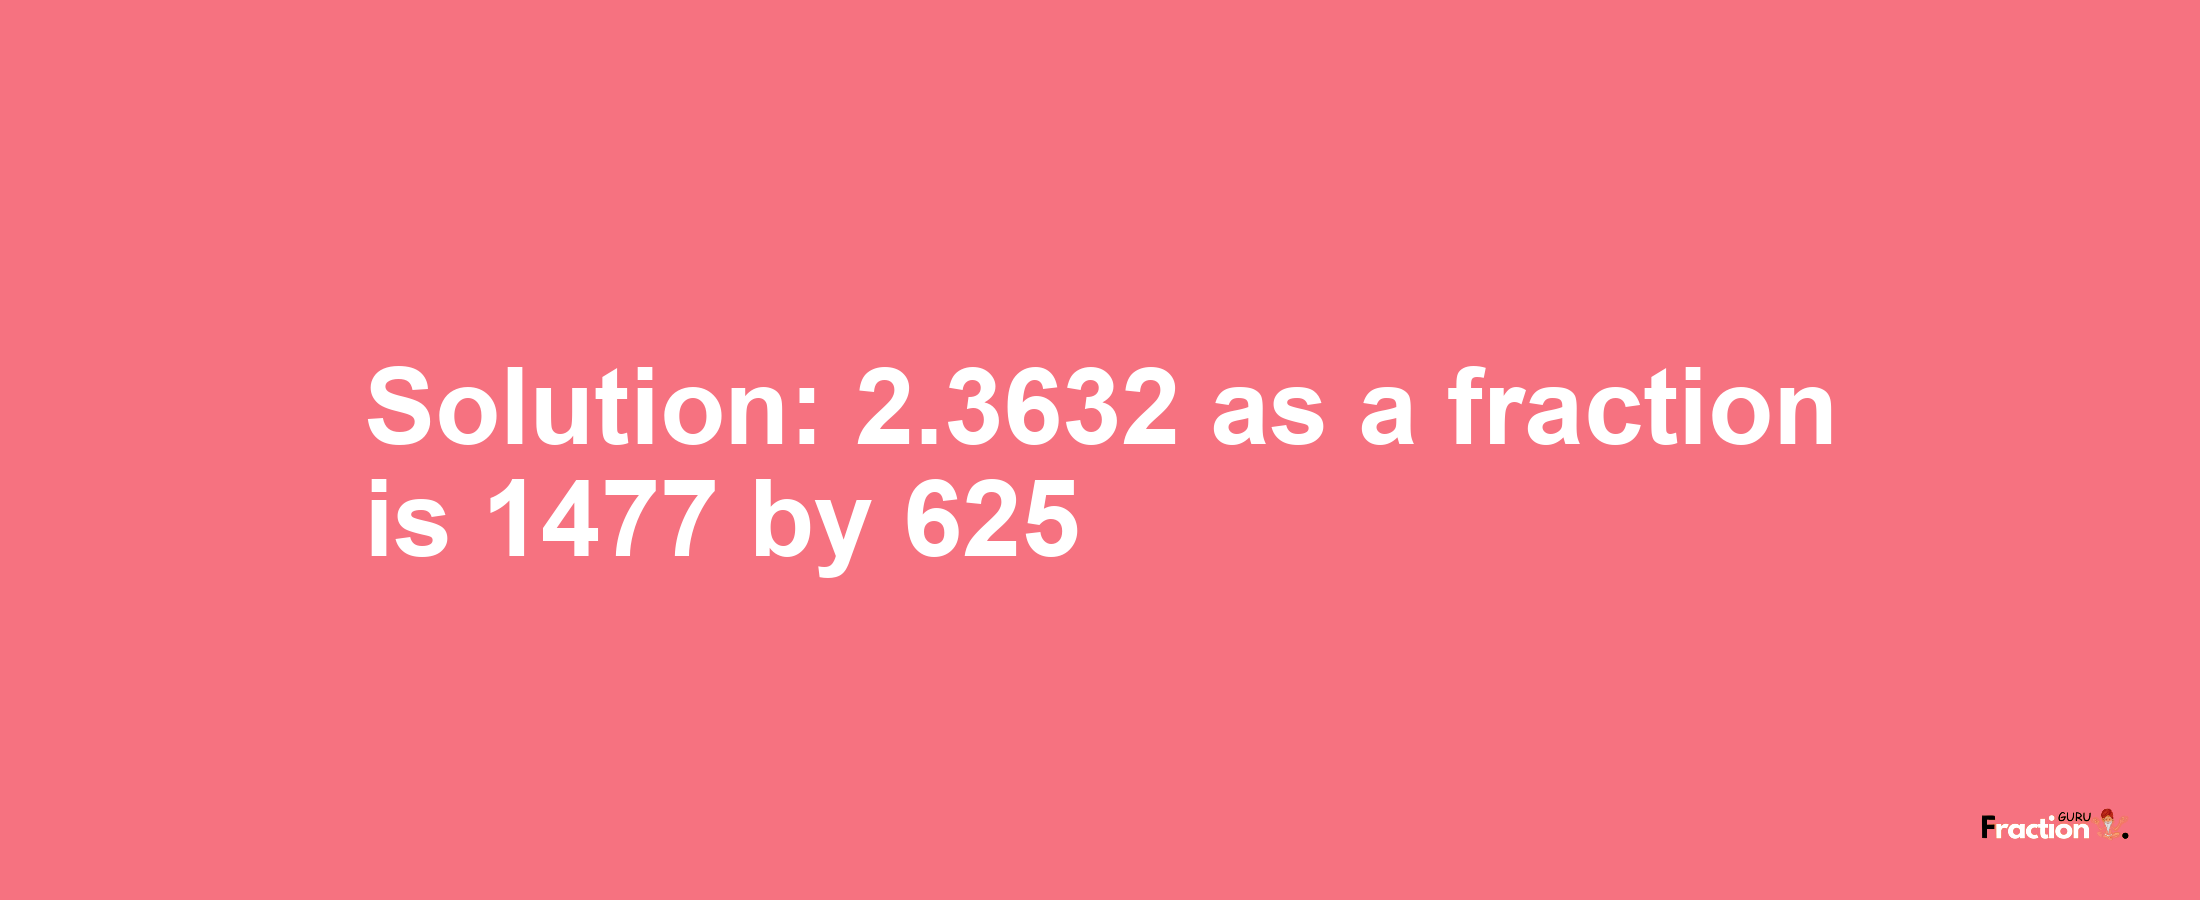 Solution:2.3632 as a fraction is 1477/625